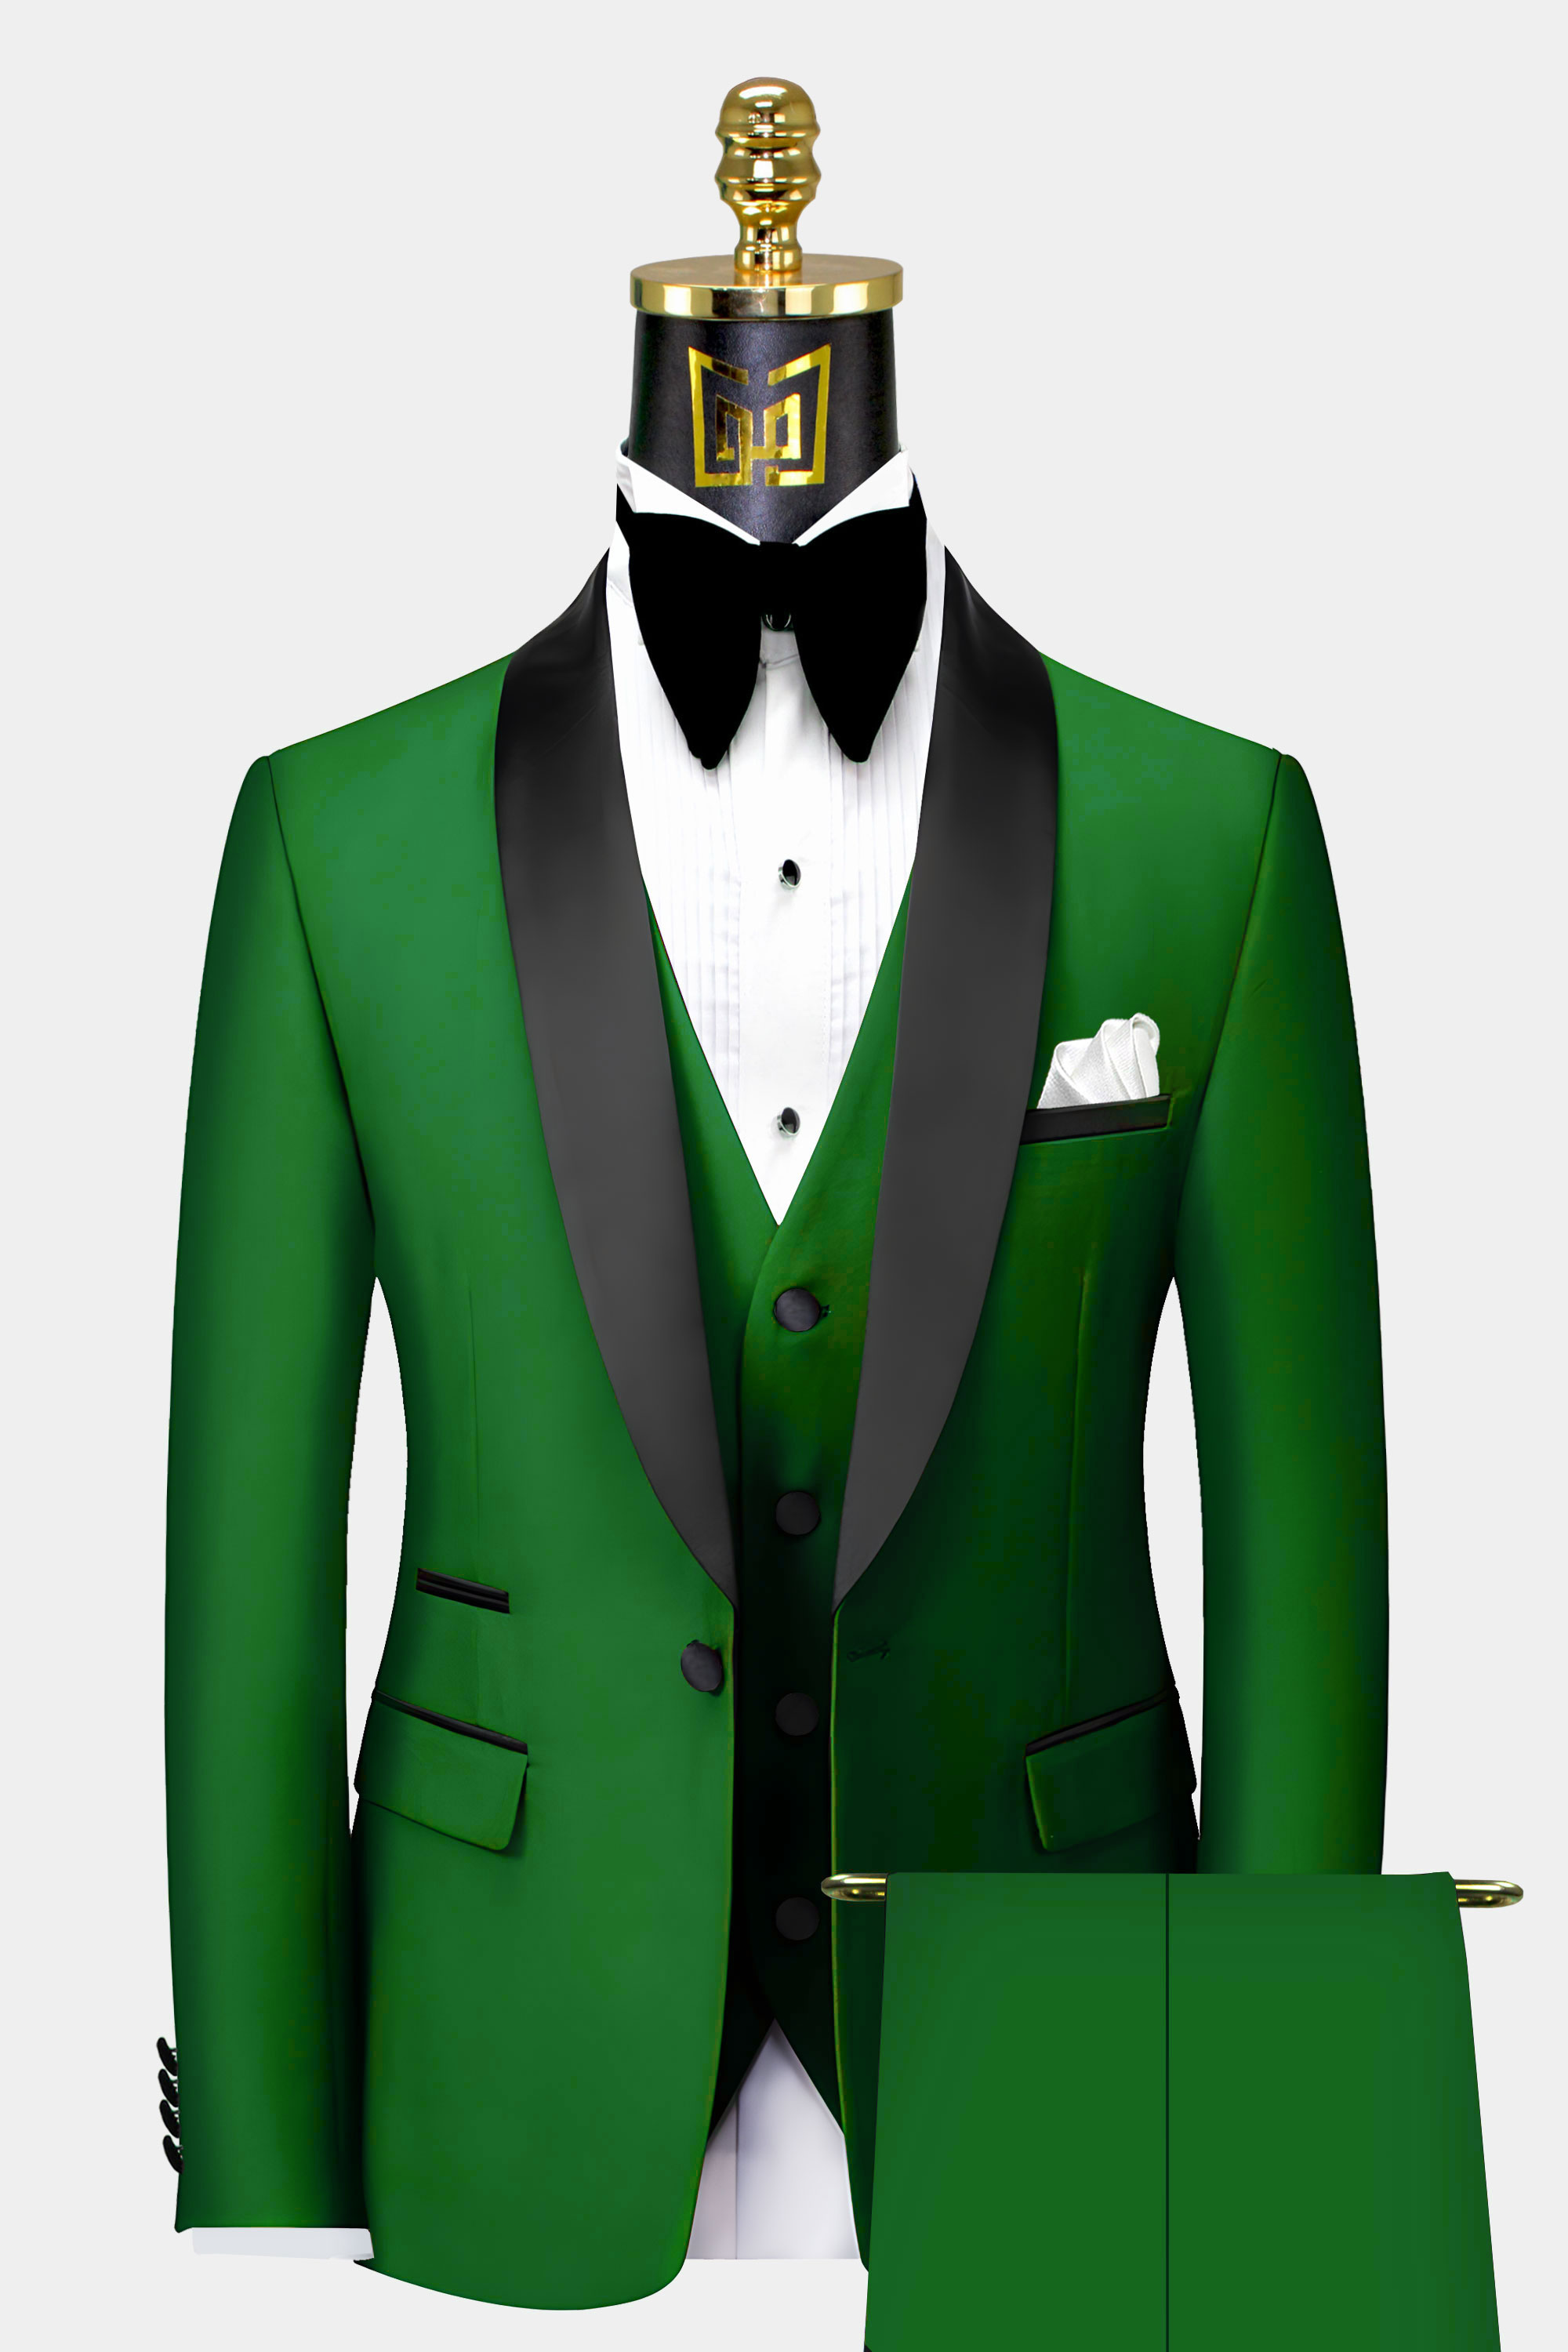 Mint Green Tuxedo Vest And Tie | vlr.eng.br